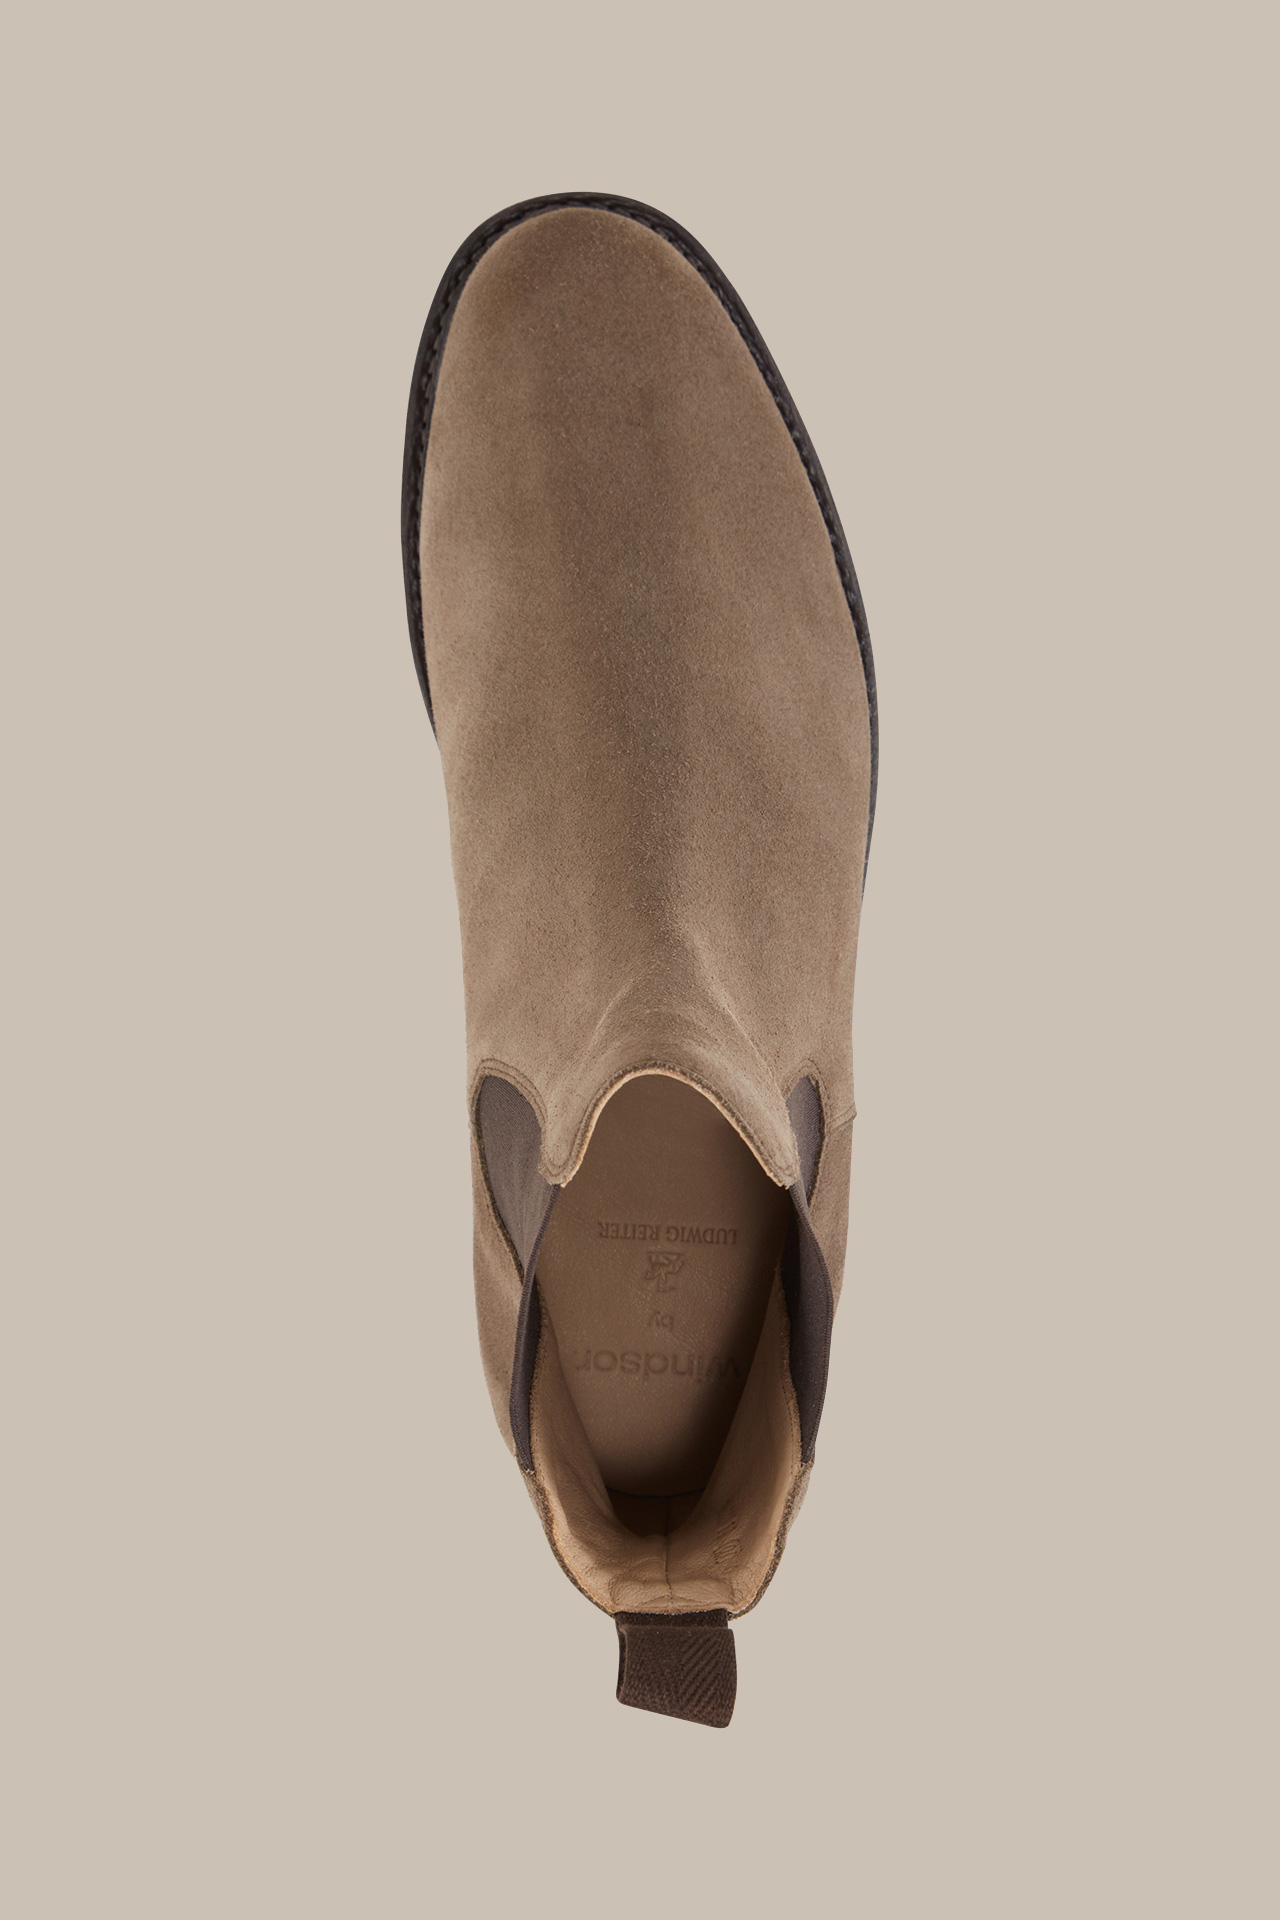 Chelsea Boots by Ludwig Reiter in Braun